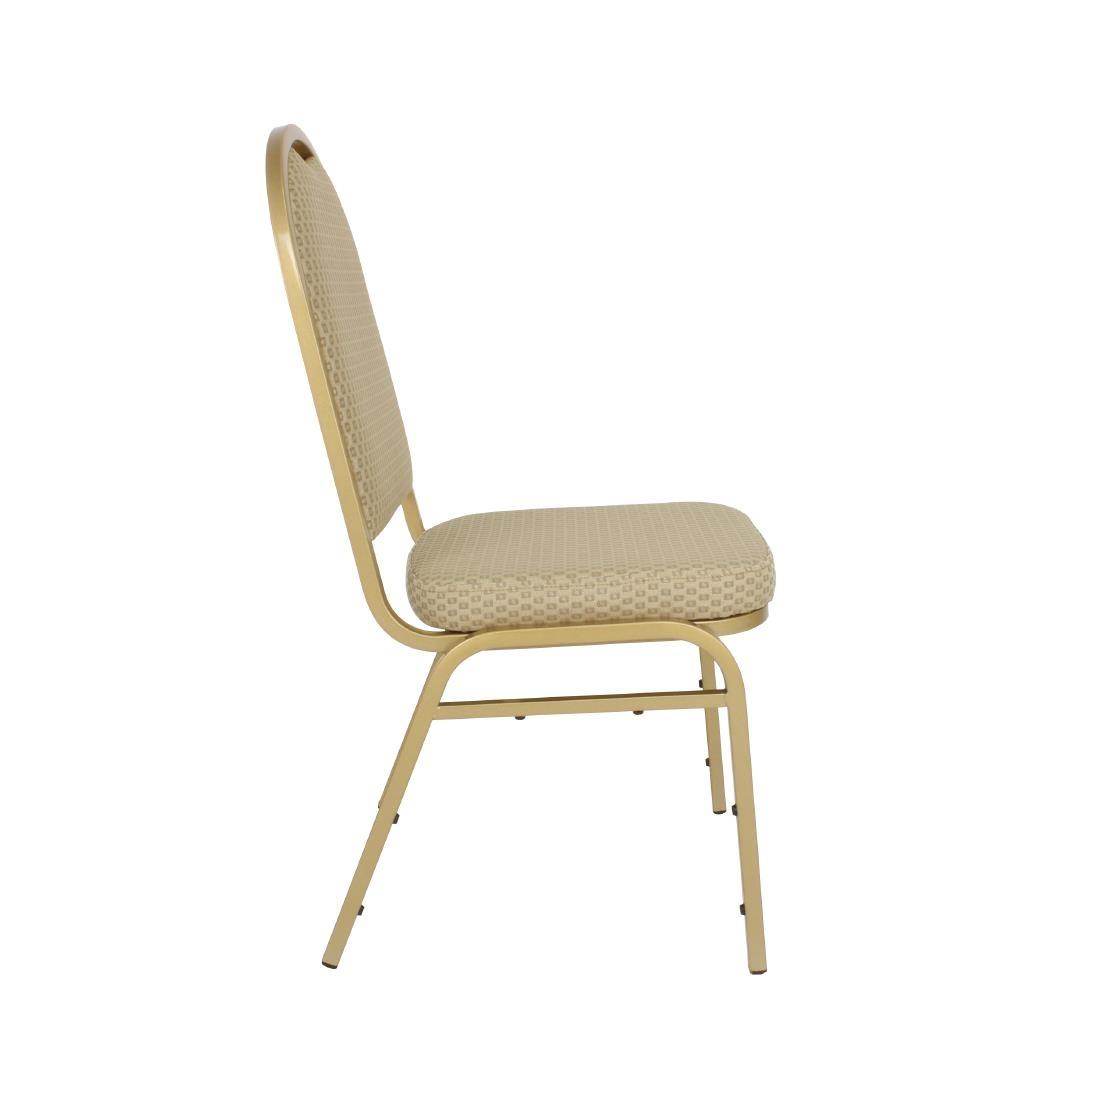 Bolero Steel Banquet Chairs with Neutral Cloth (Pack of 4) - GR360  - 3